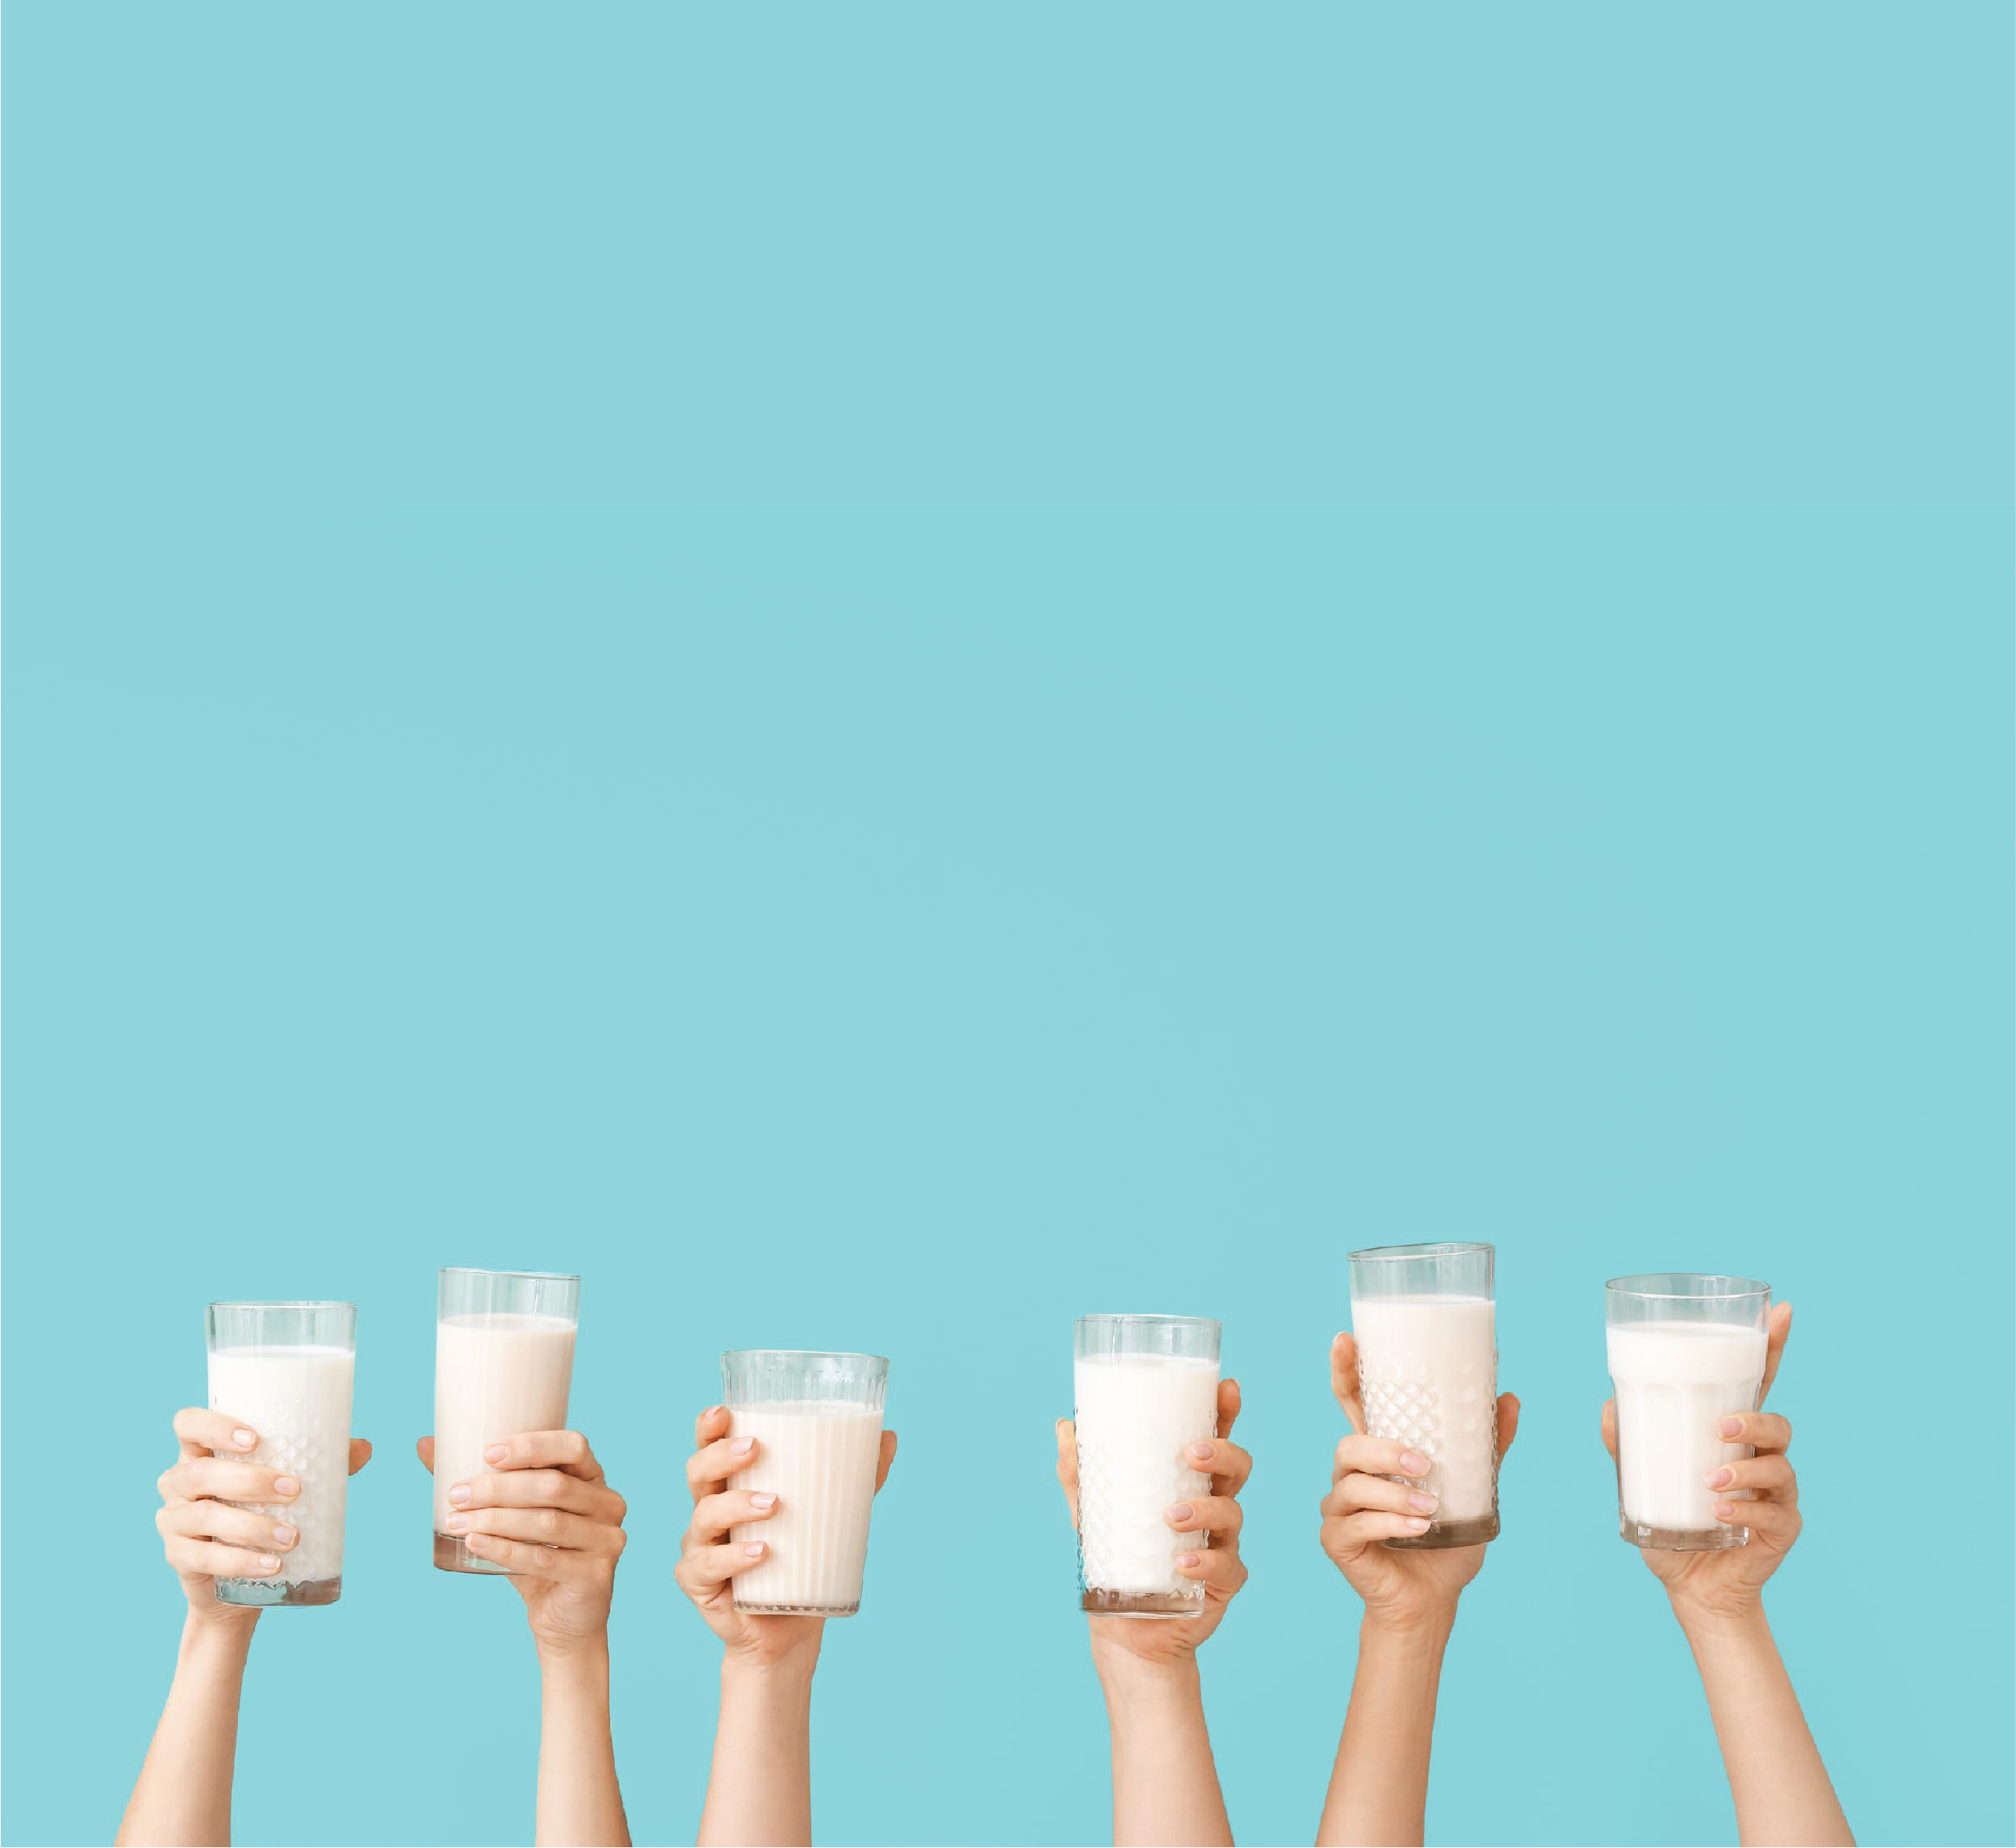 Picture of hands holding up glasses of milk